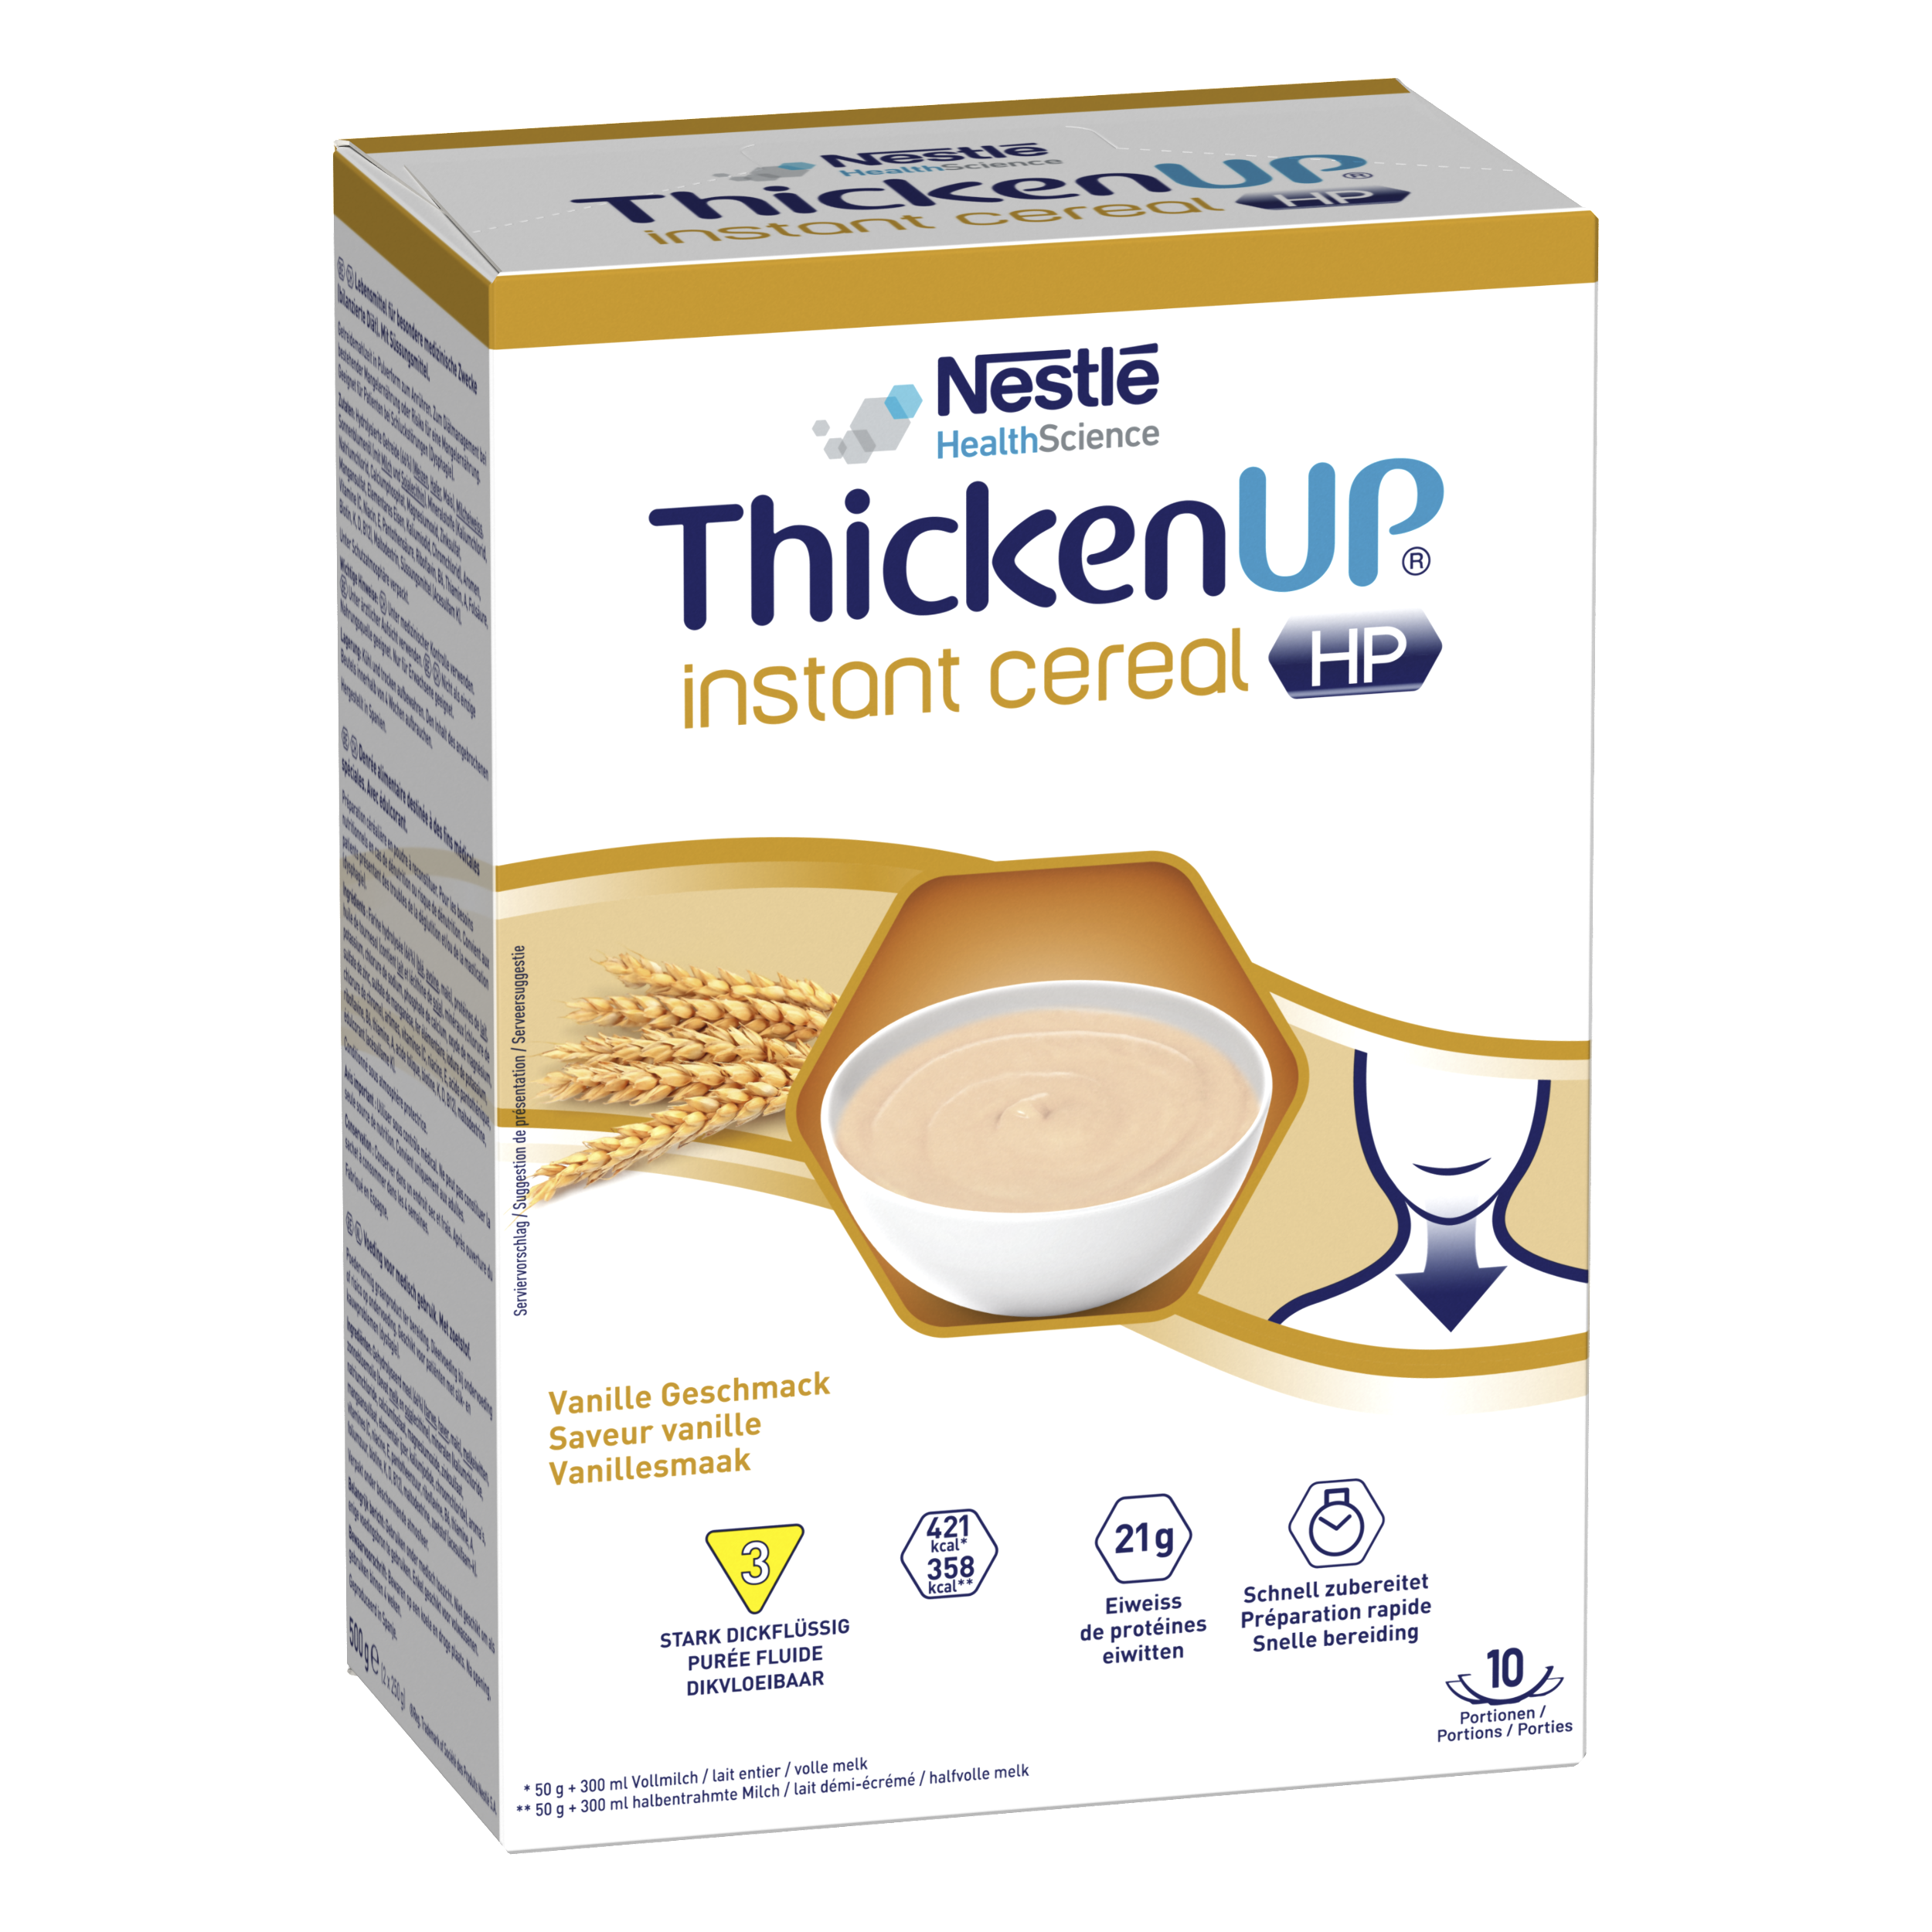 ThickenUP® instant cereal HP​